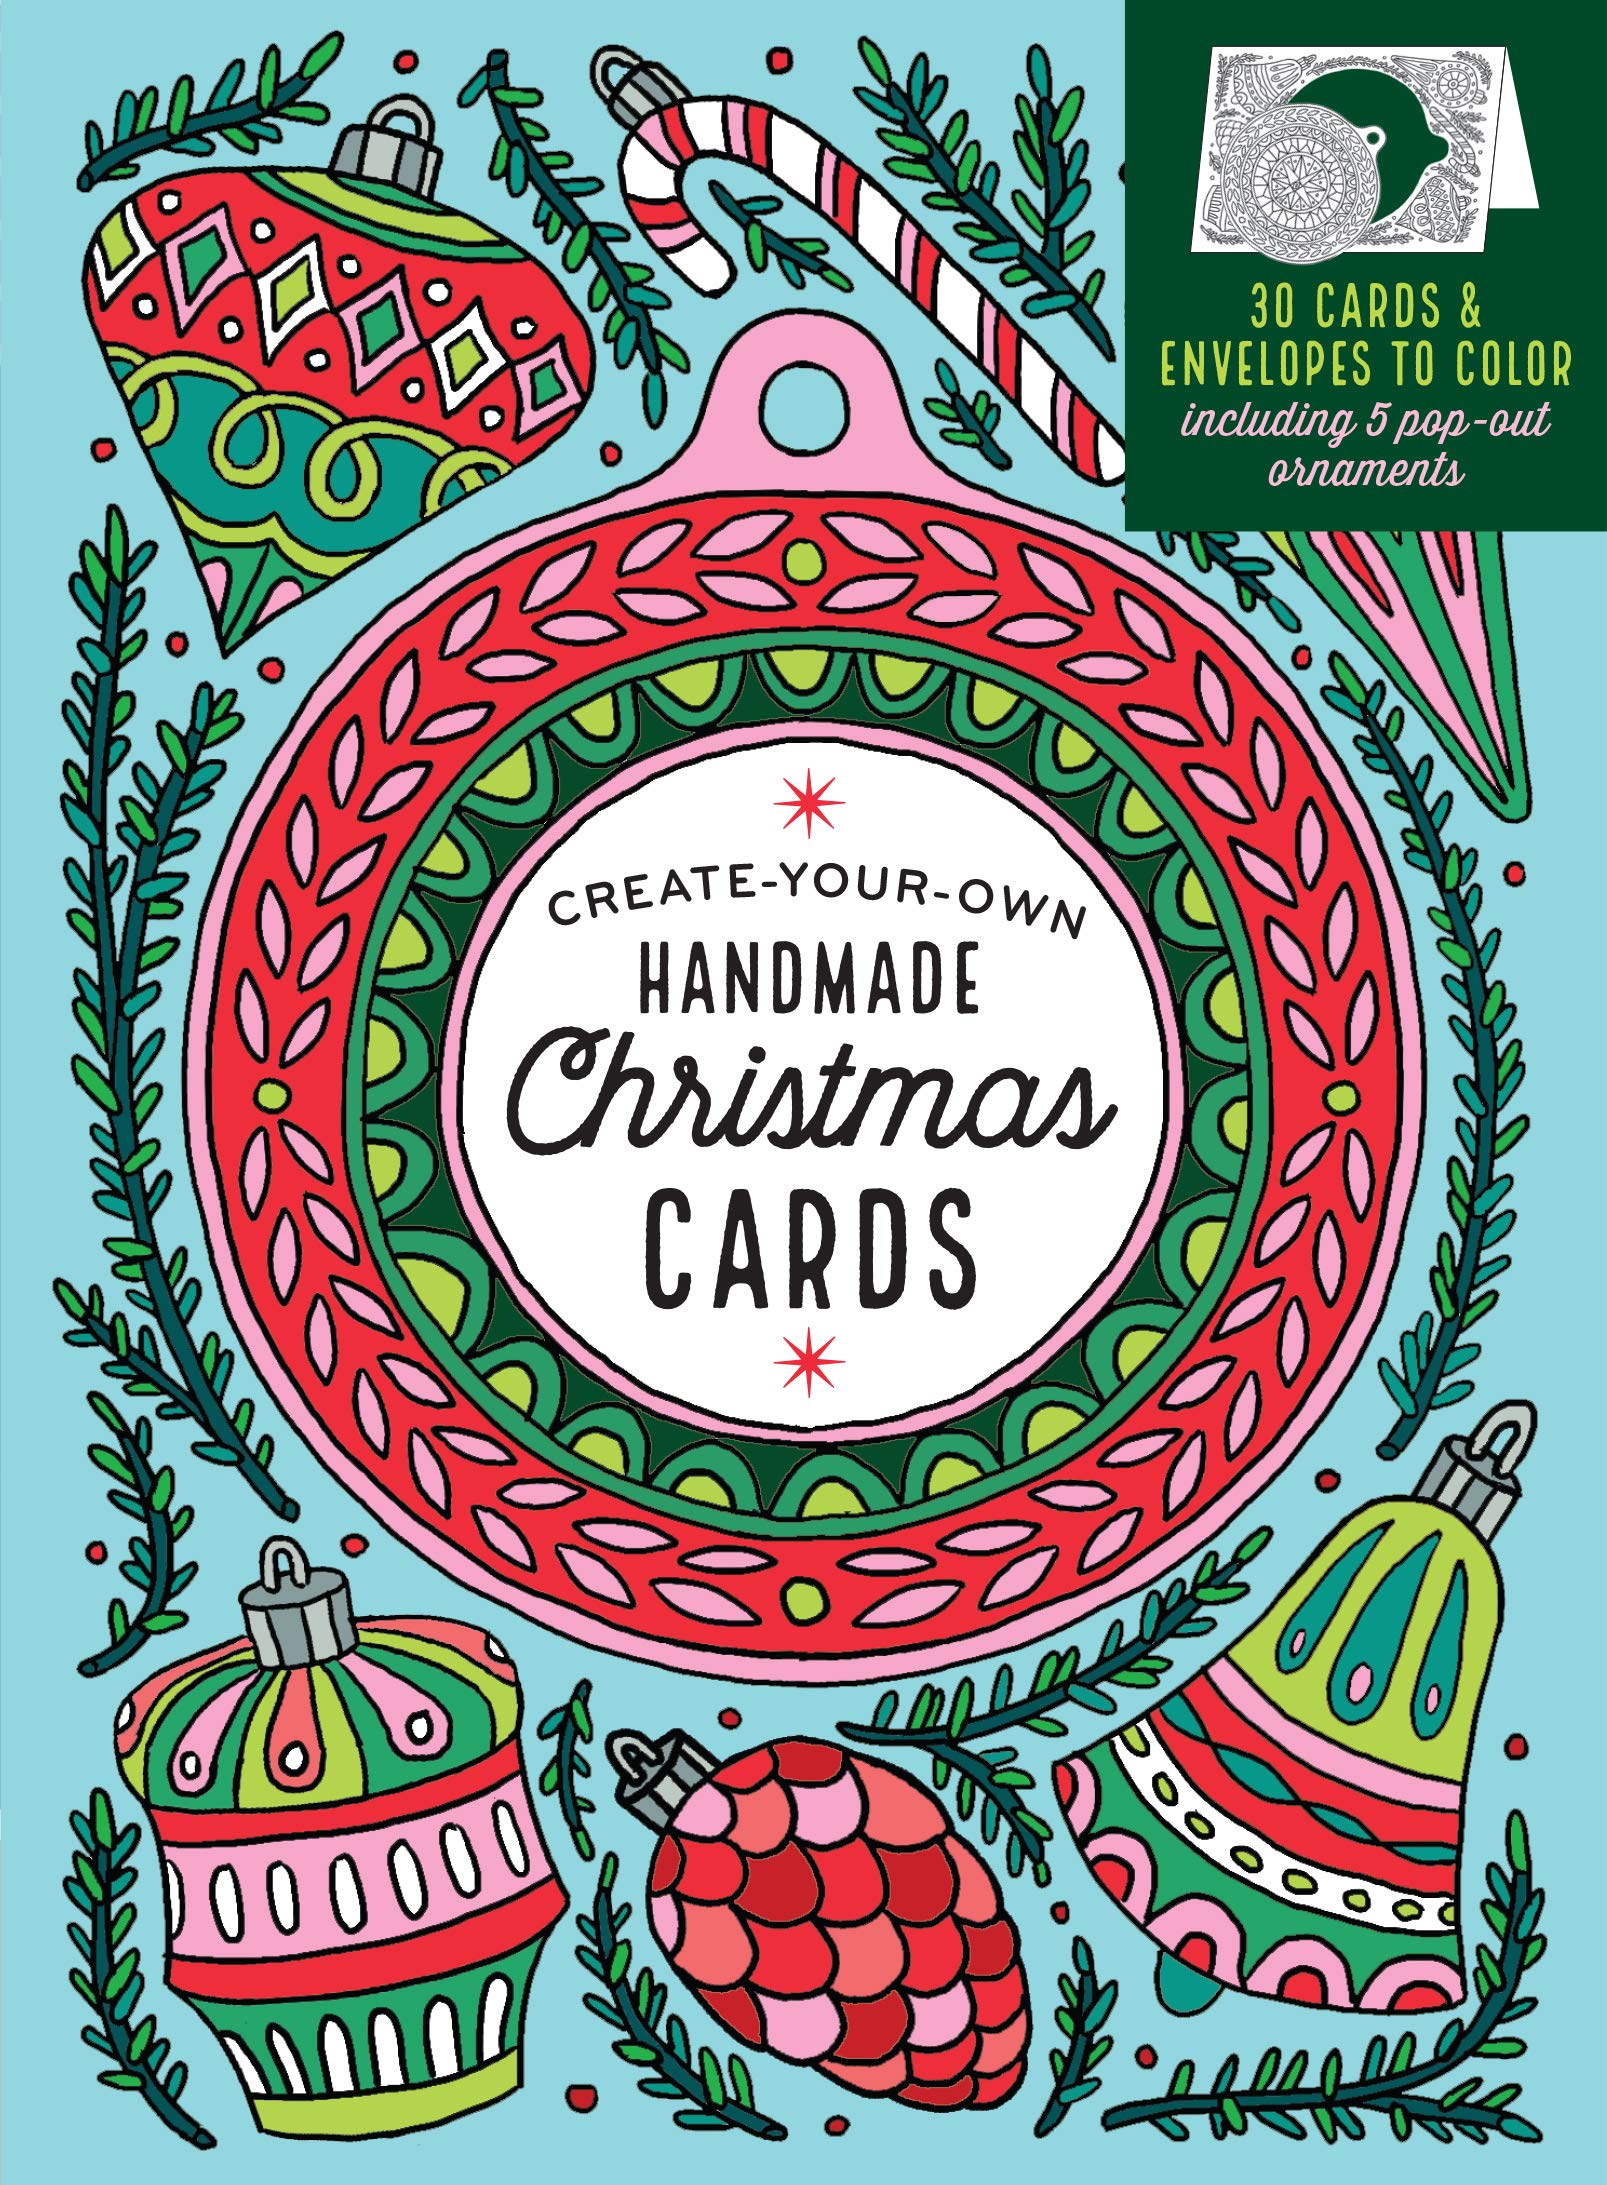 Create Your Own Handmade Christmas Cards, Envelopes, Ornaments : Gifts under $15